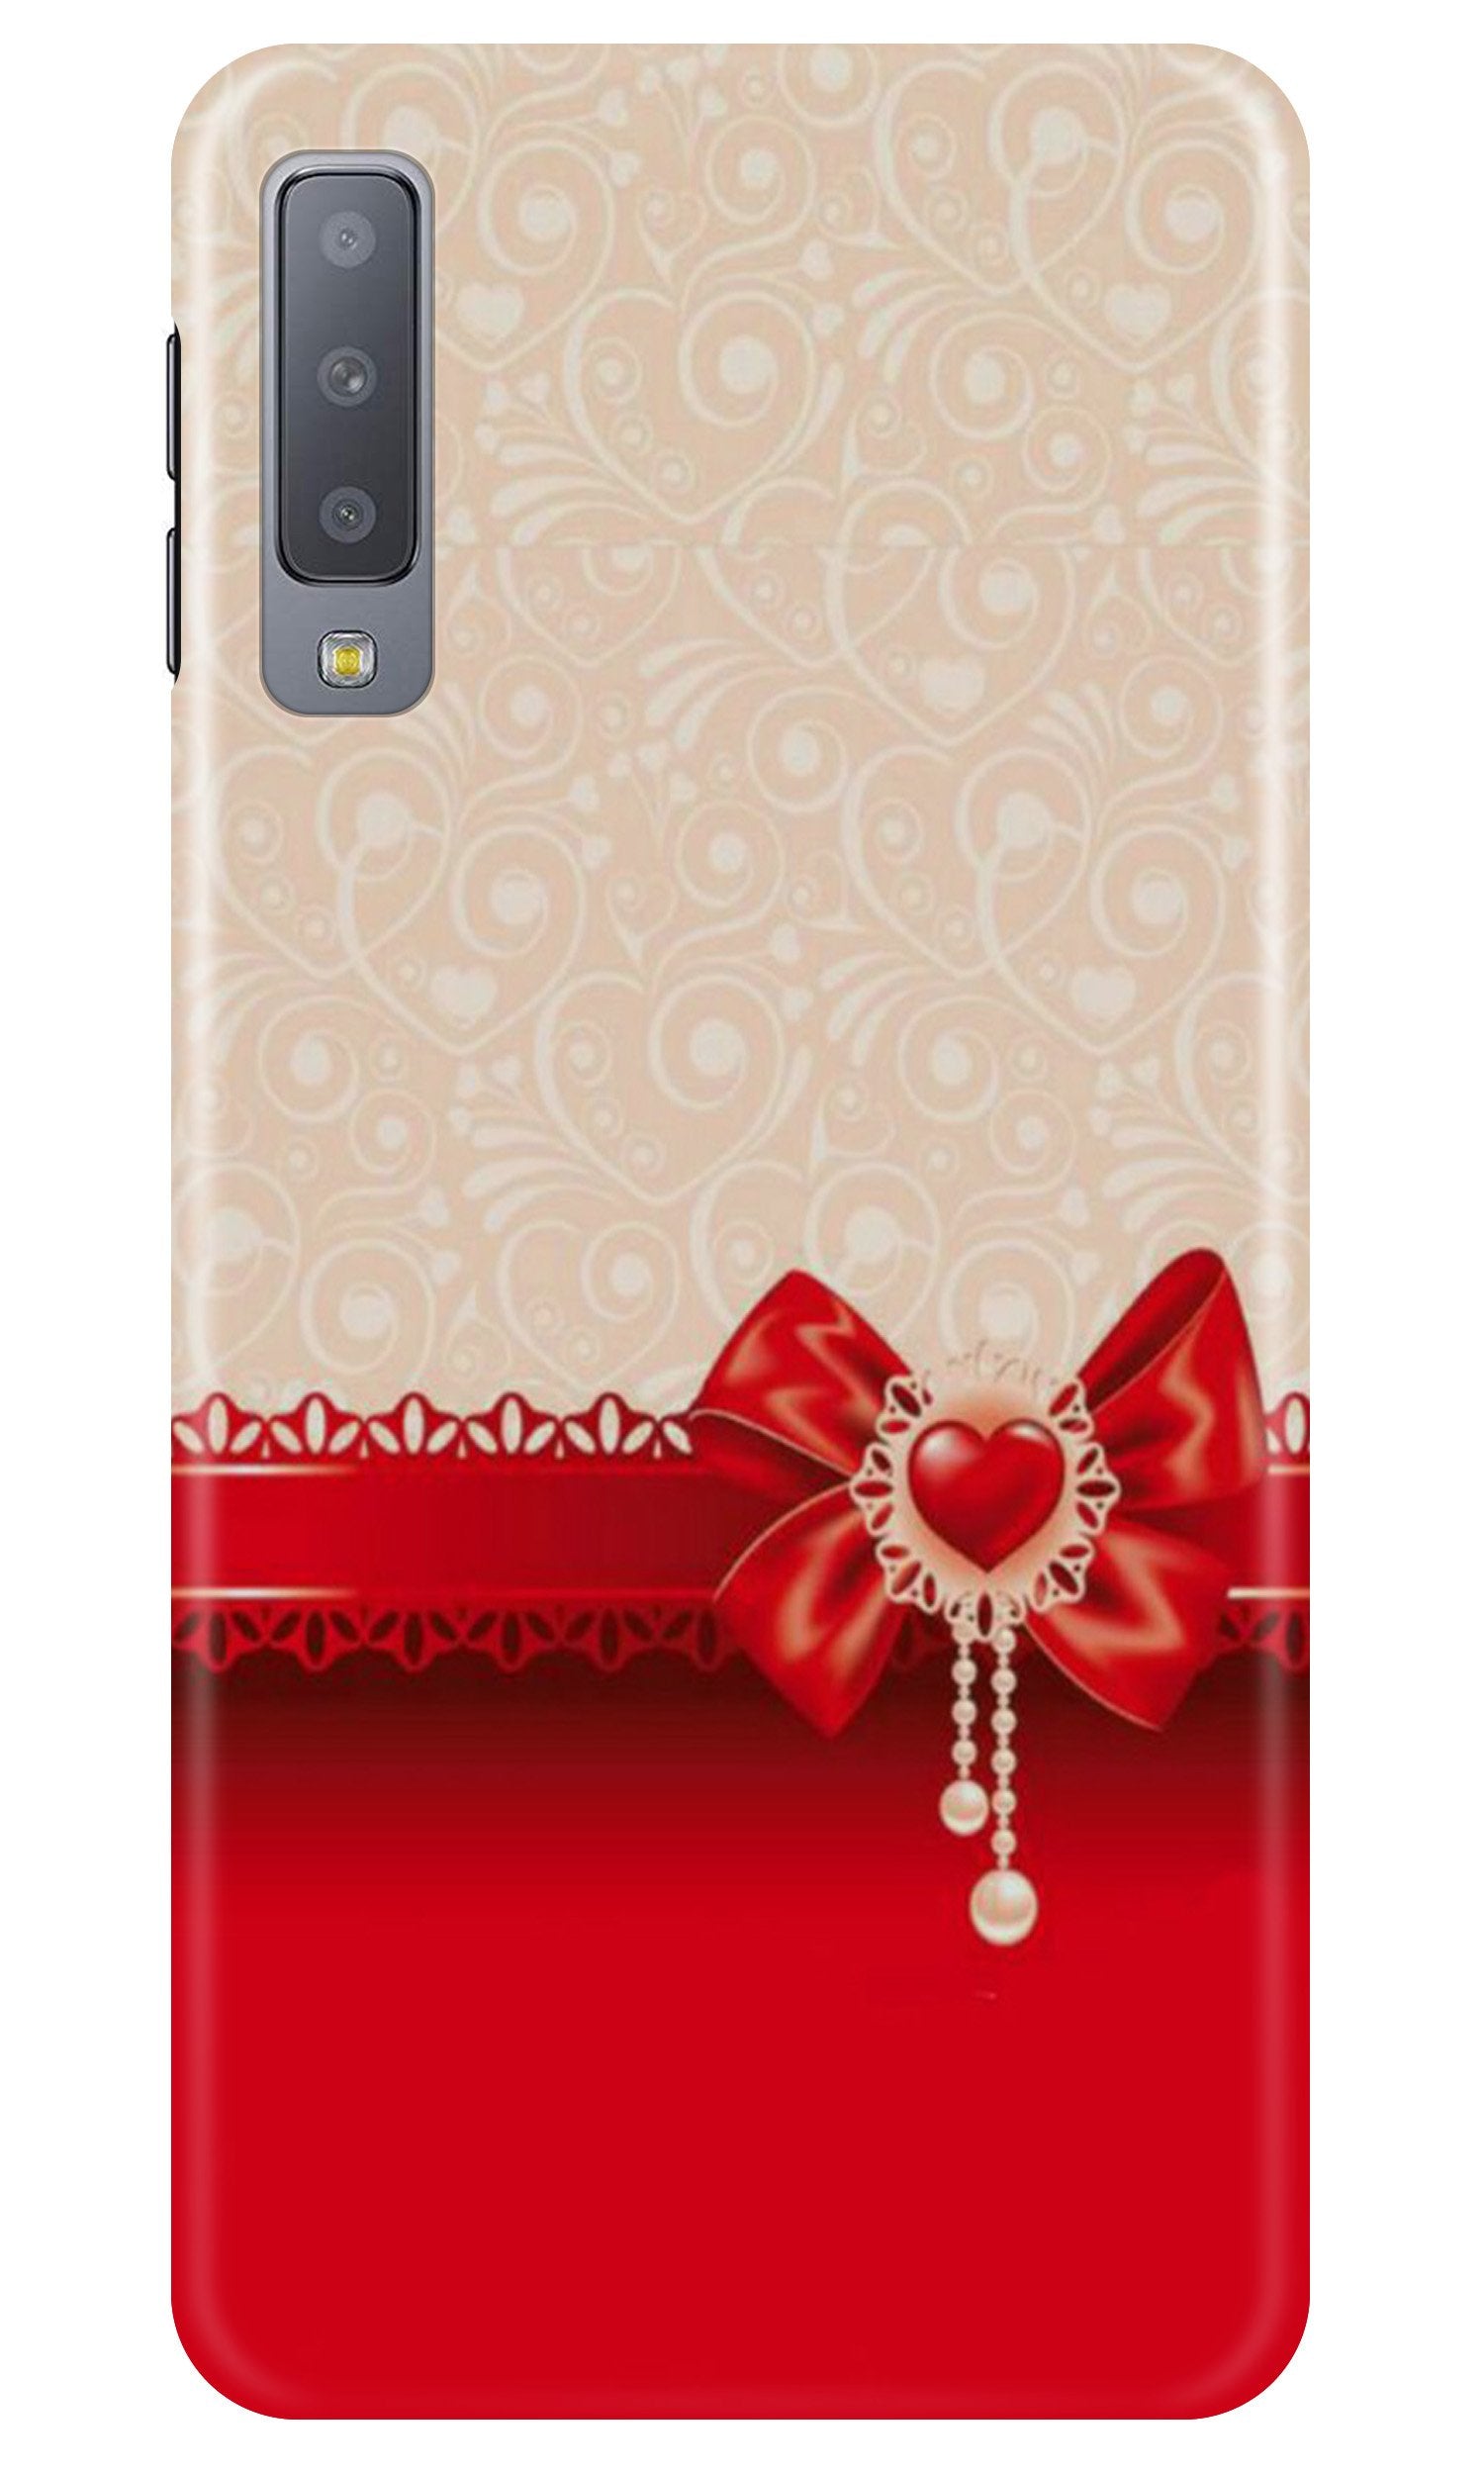 Gift Wrap3 Case for Samsung Galaxy A50s